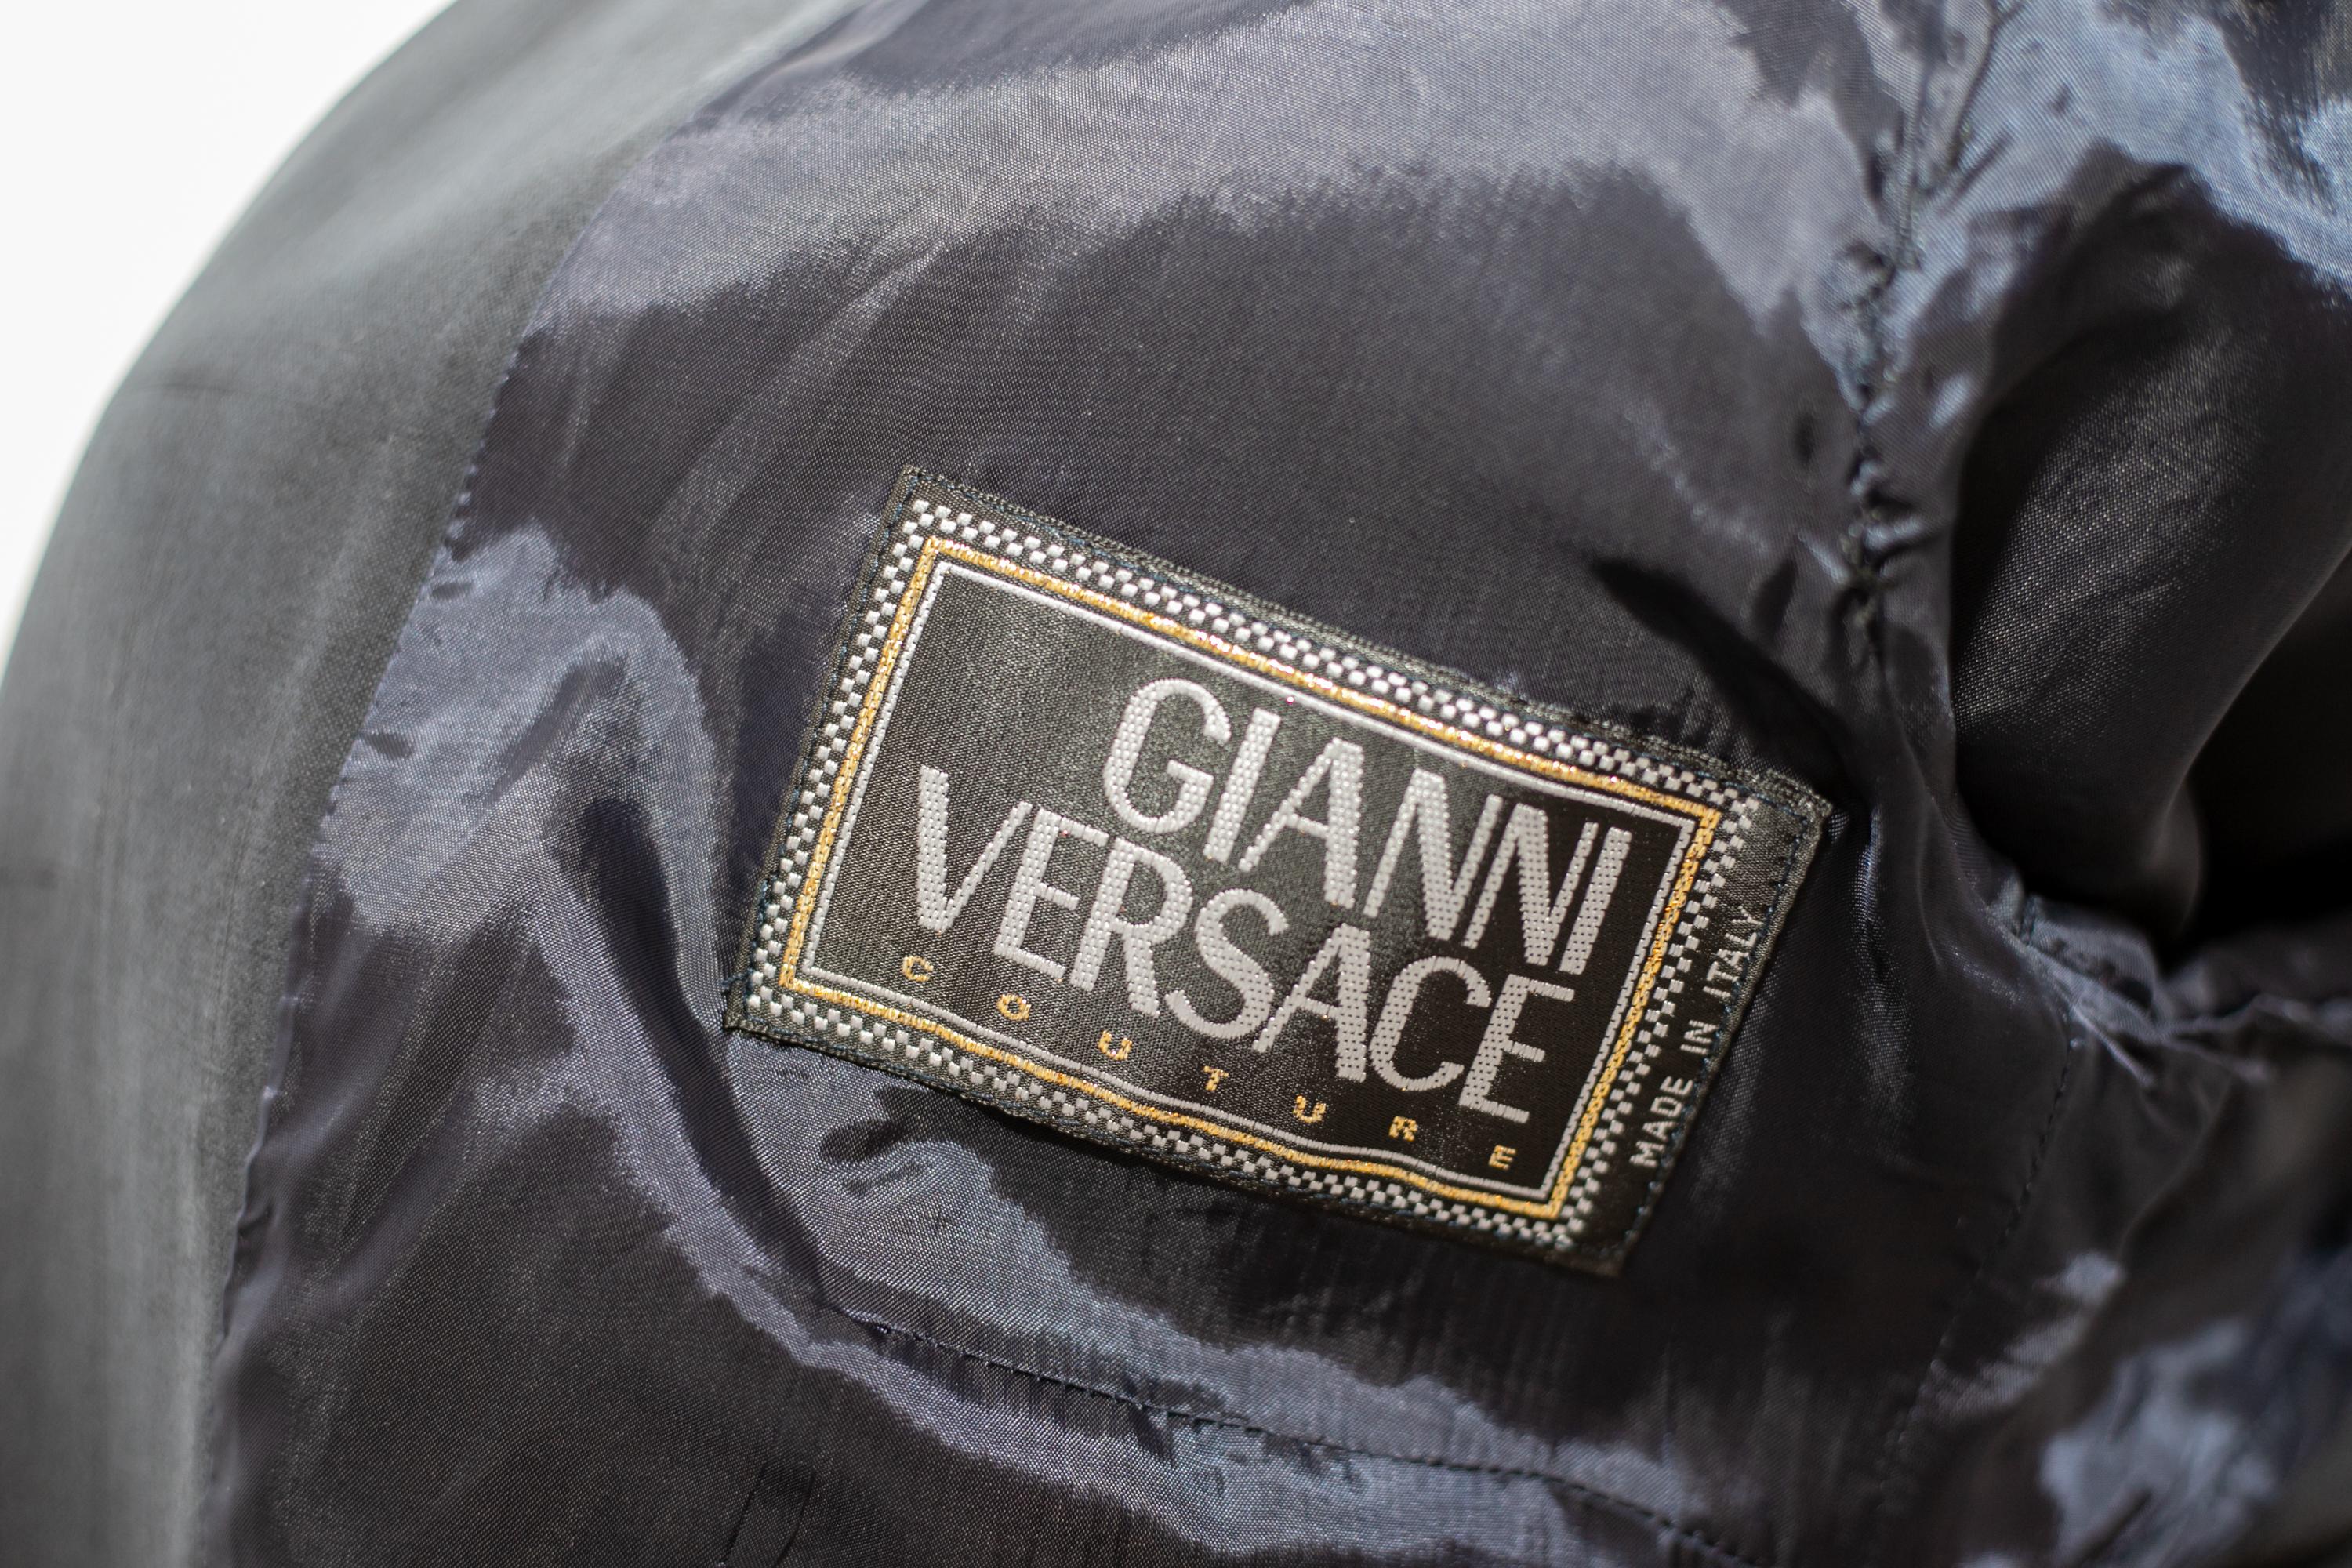 Rare black jacket designed by the great Gianni Versace in the 1980s, made in Italy. Original label inside.
The jacket has very soft but direct lines.
The jacket falls softly on you and is made entirely of soft and light black fabric. The only